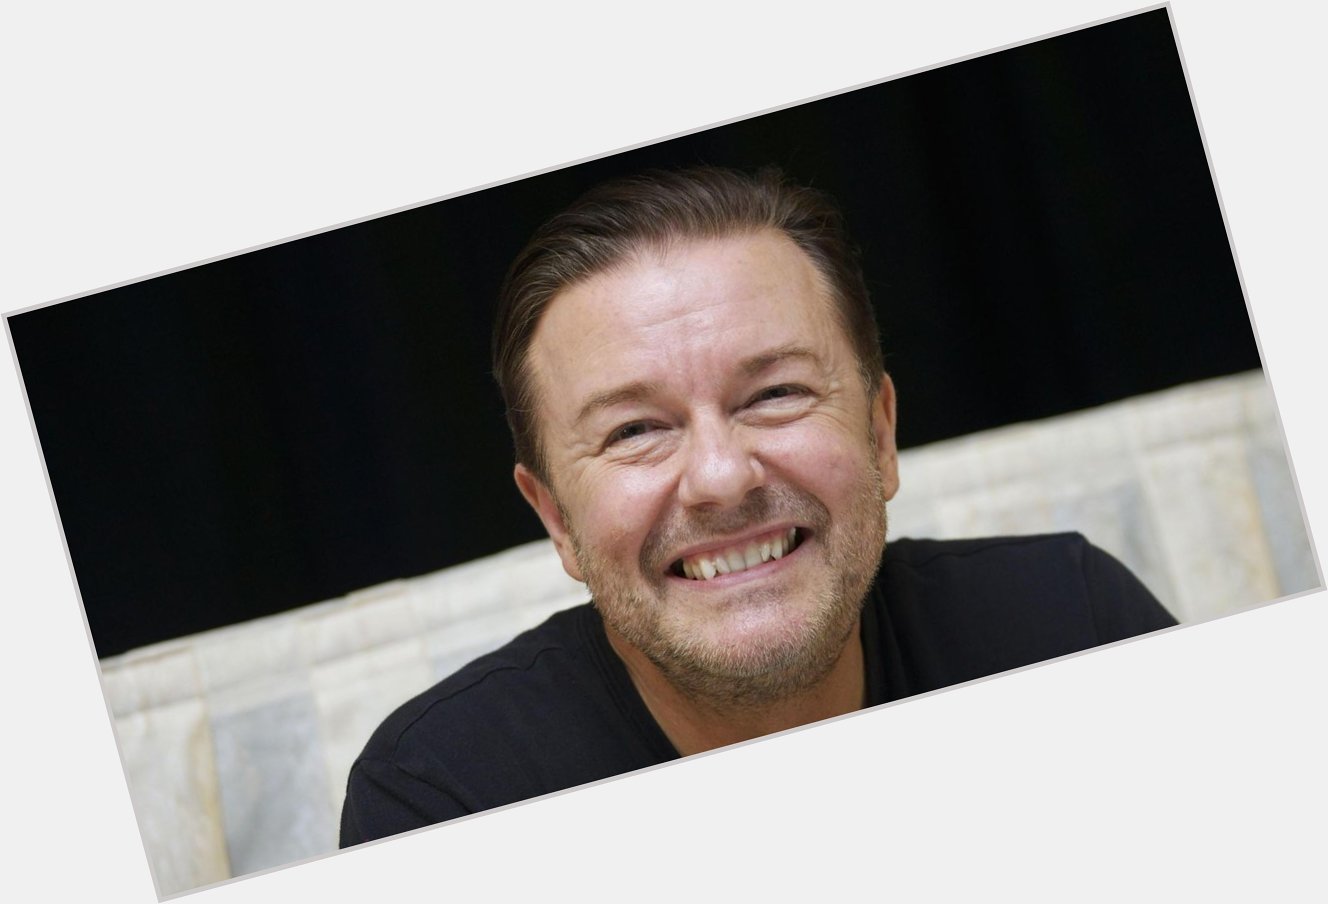 Happy 54th birthday today to Ricky Gervais, a very funny man.   